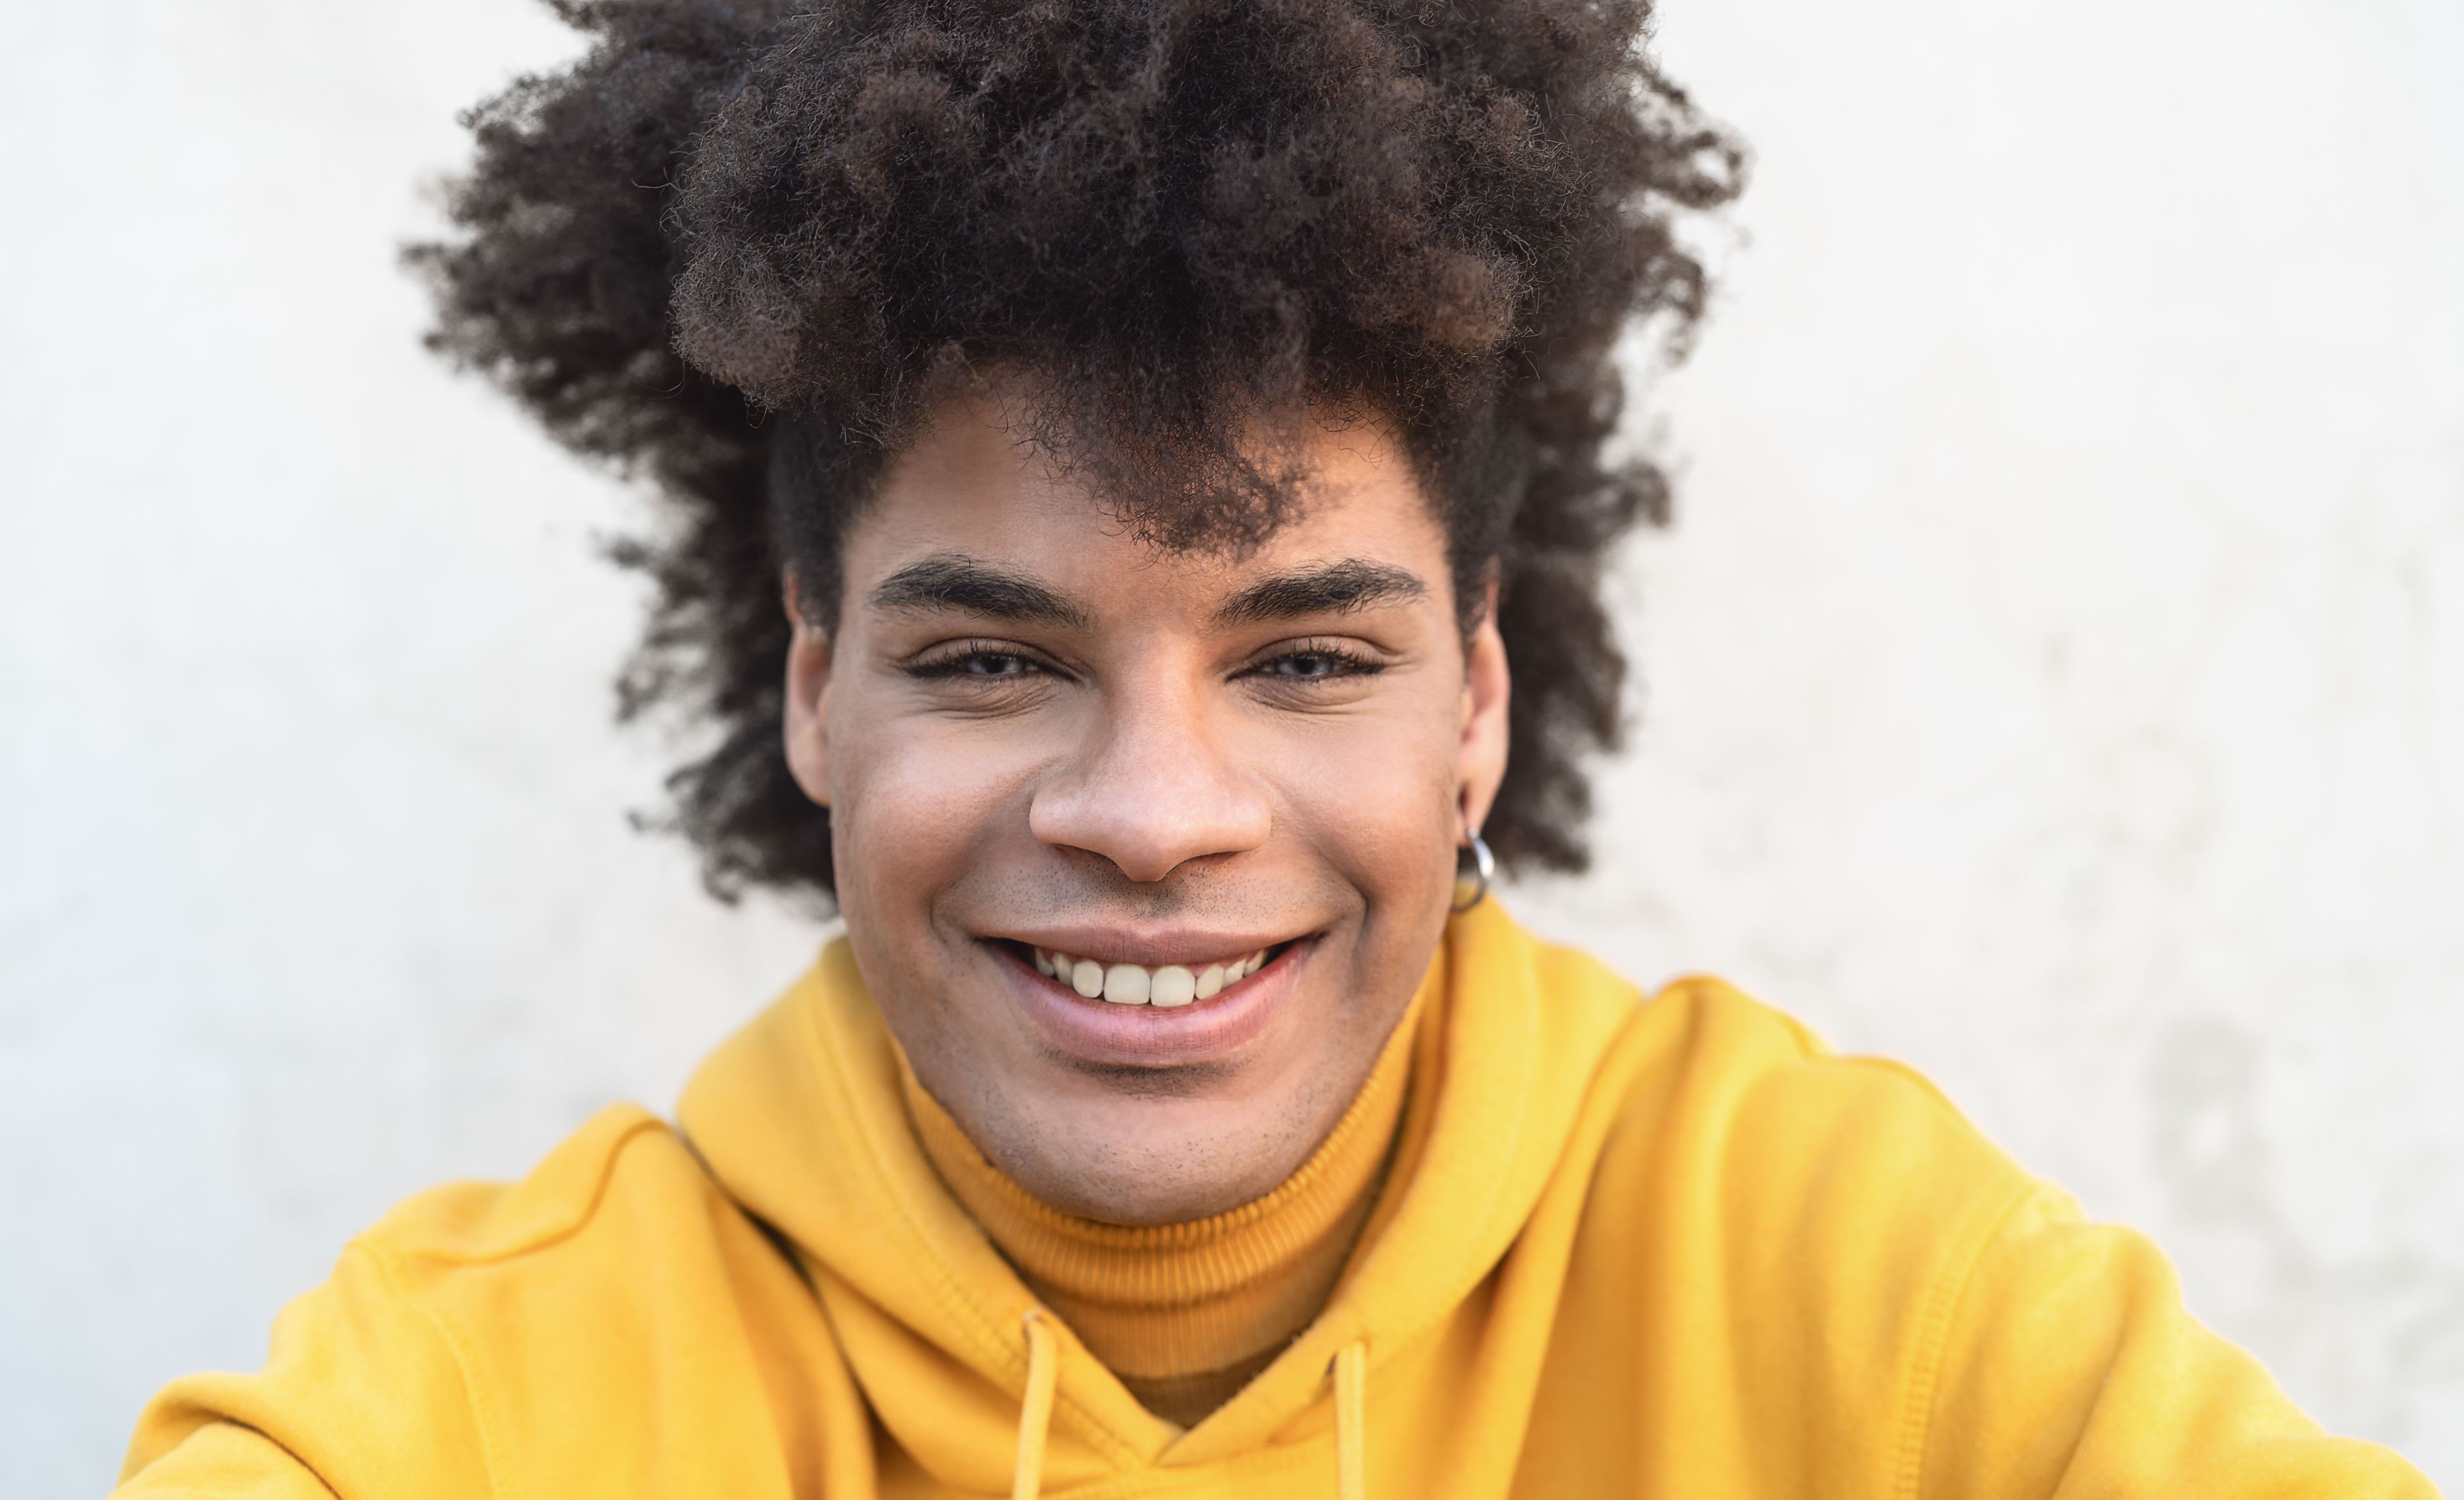 Young man with natural hair